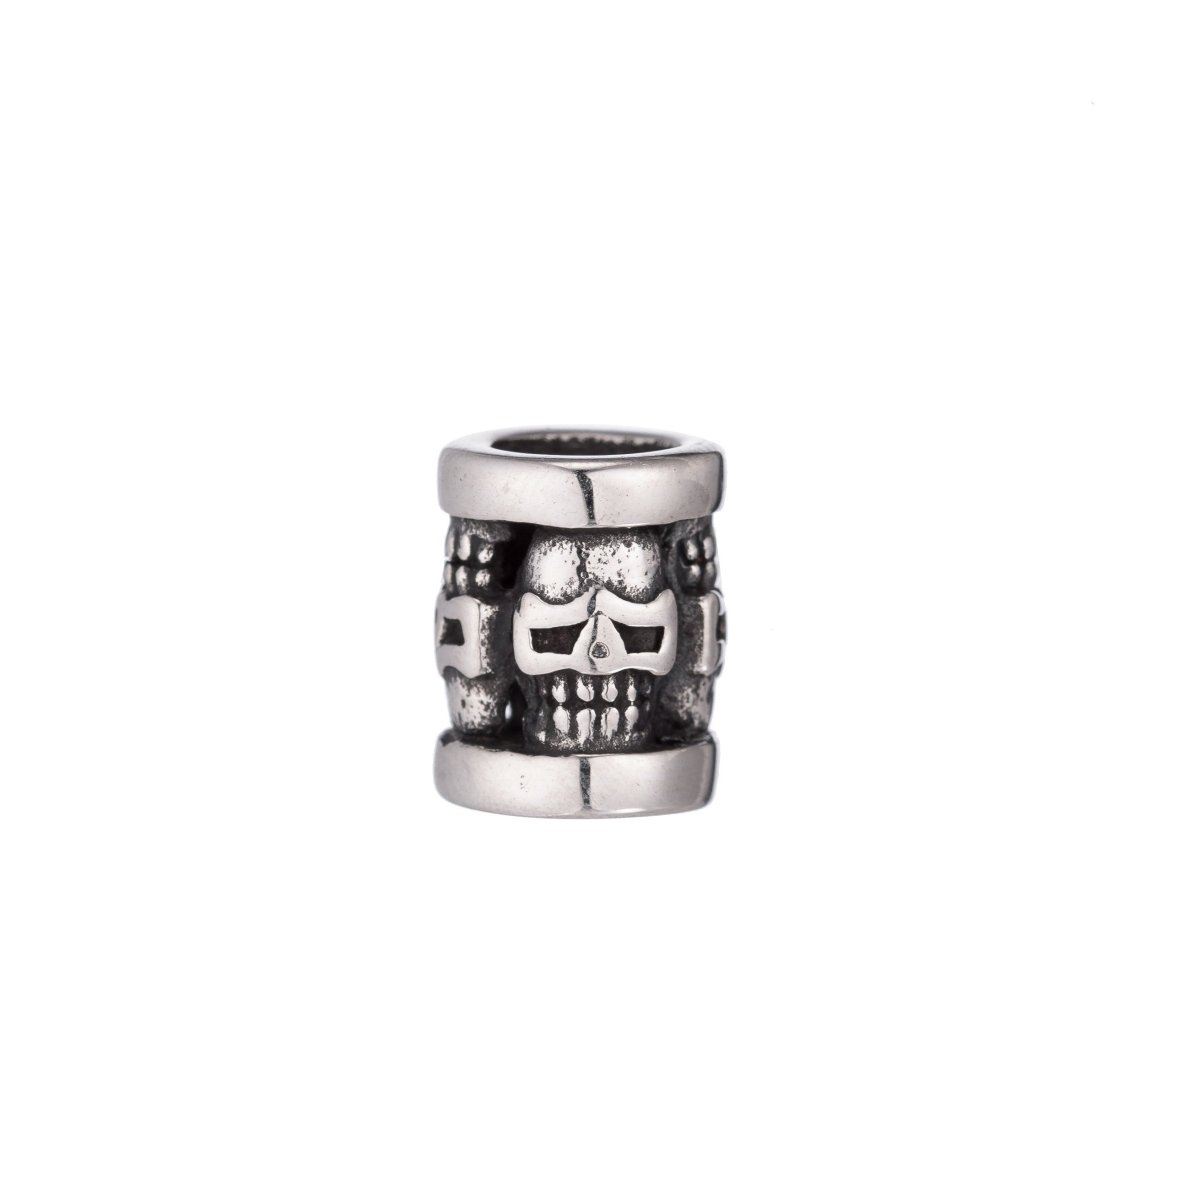 1pc Stainless Steel Silver Skull Crown Scary DIY Halloween Essential Pendant Bracelet Charm Bead Finding Connector Spacer for Jewelry Making - DLUXCA